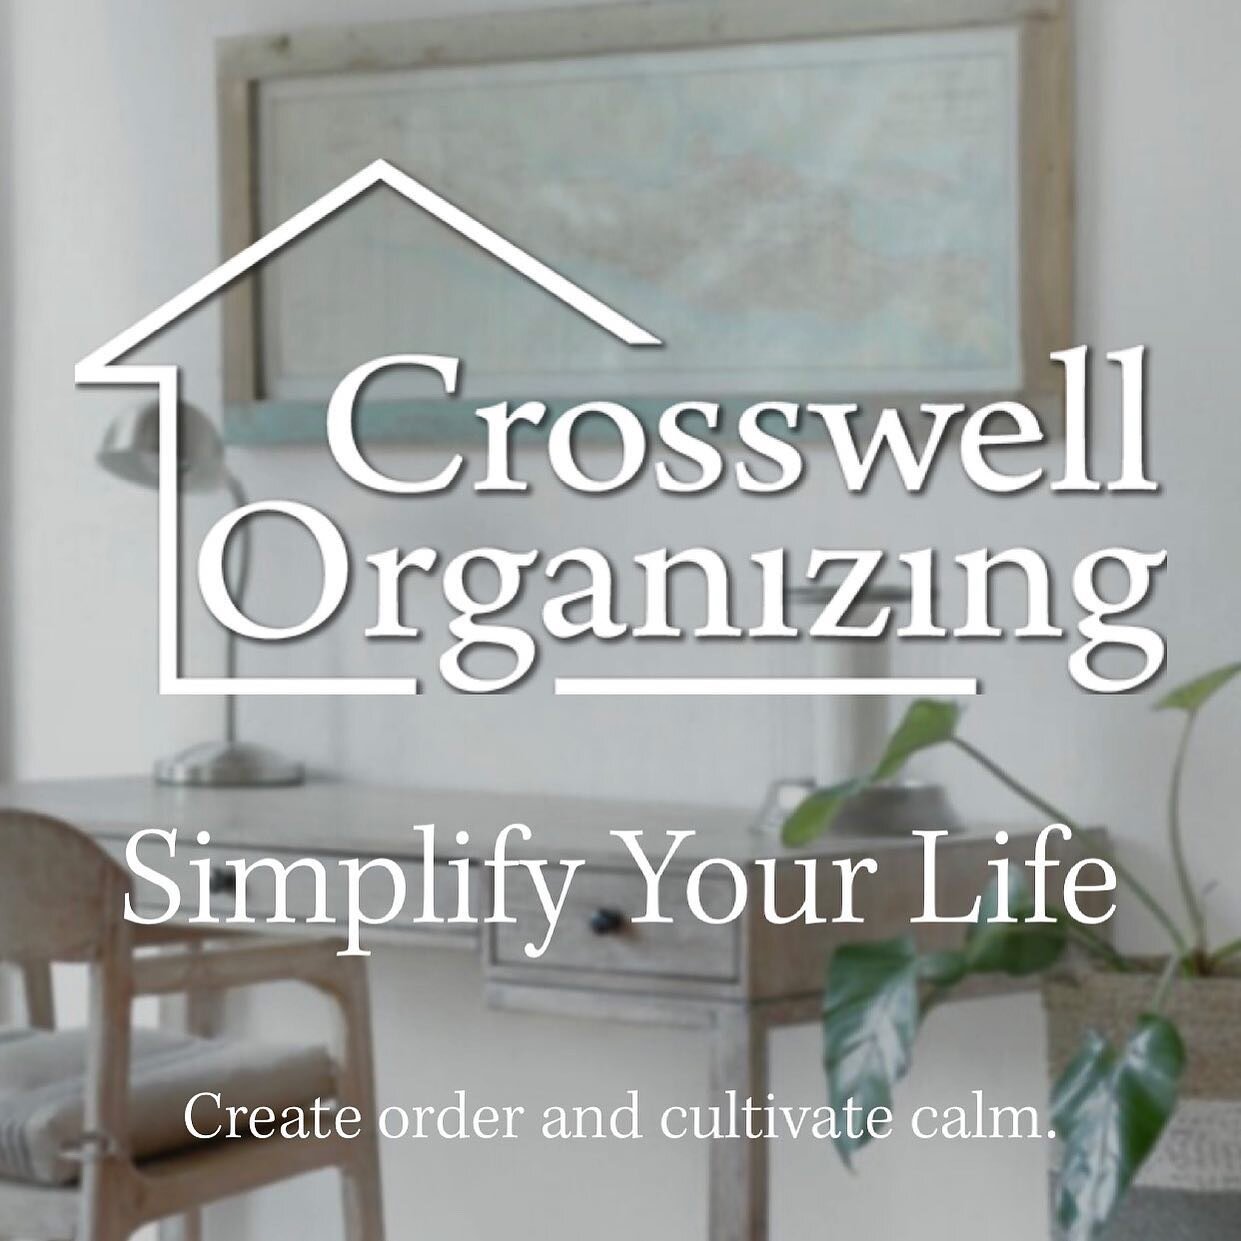 Crosswell Organizing is excited to announce the launch of our new website! Check it out 👀www.crosswellorganizing.com
.
.
#crosswellorganizing #professionalorganizer #houstonorganizer #homeorganization #home #interiors #homeinterior #simplifyyourlife